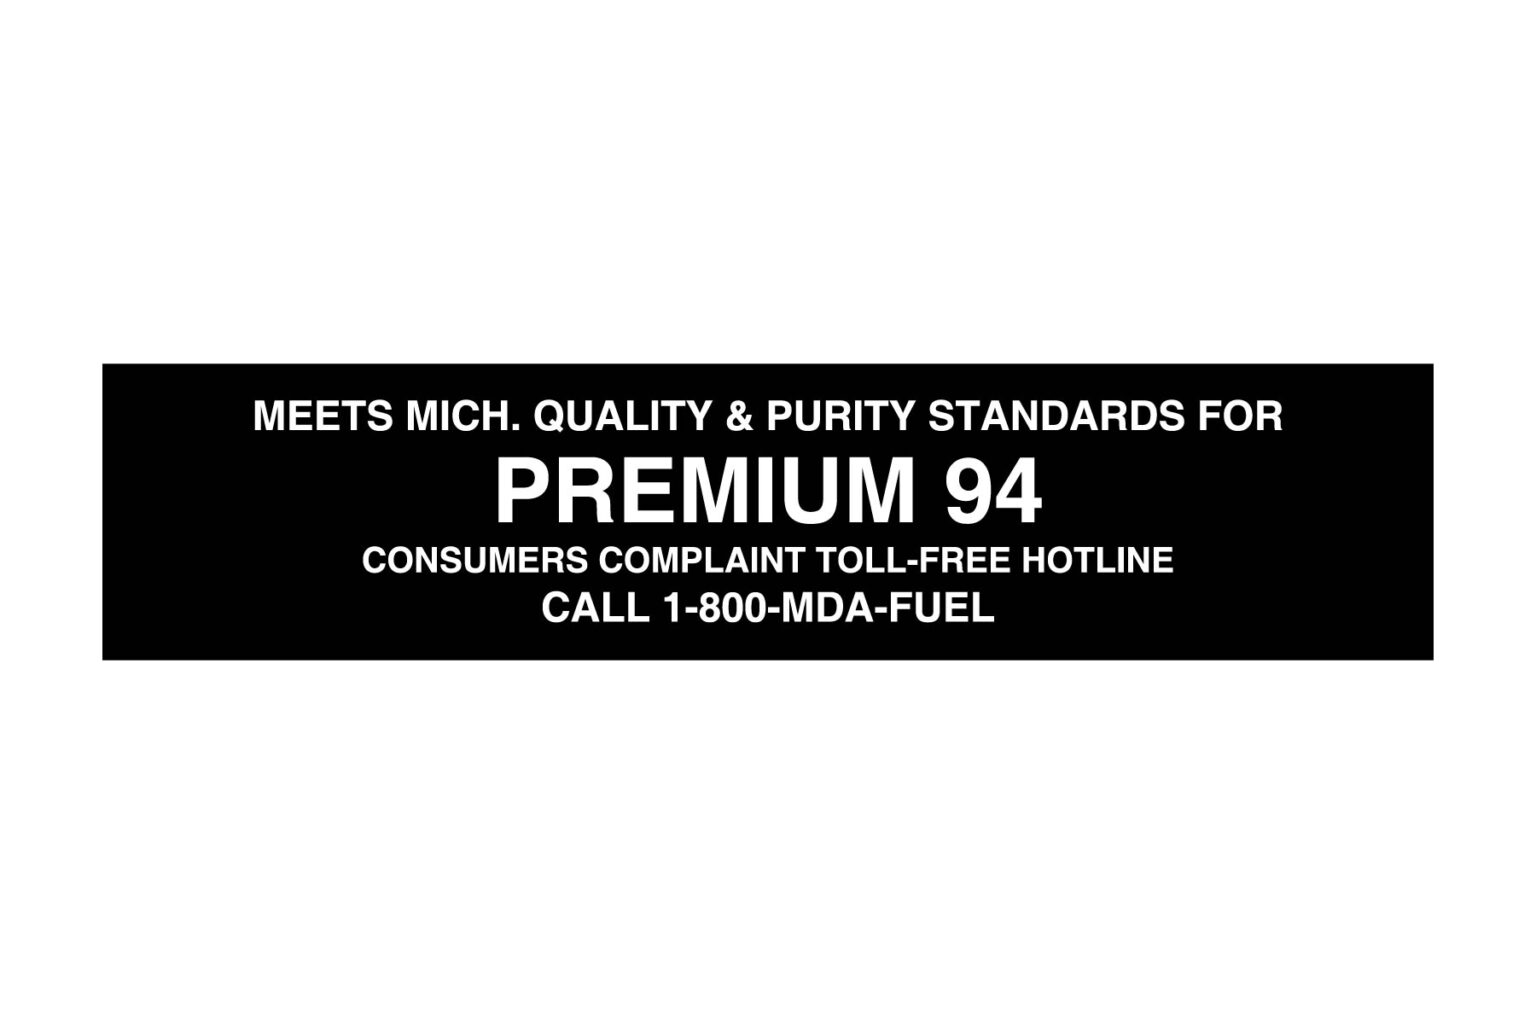 Meets Michigan Quality & Purity Standards for Premium 94 Decal